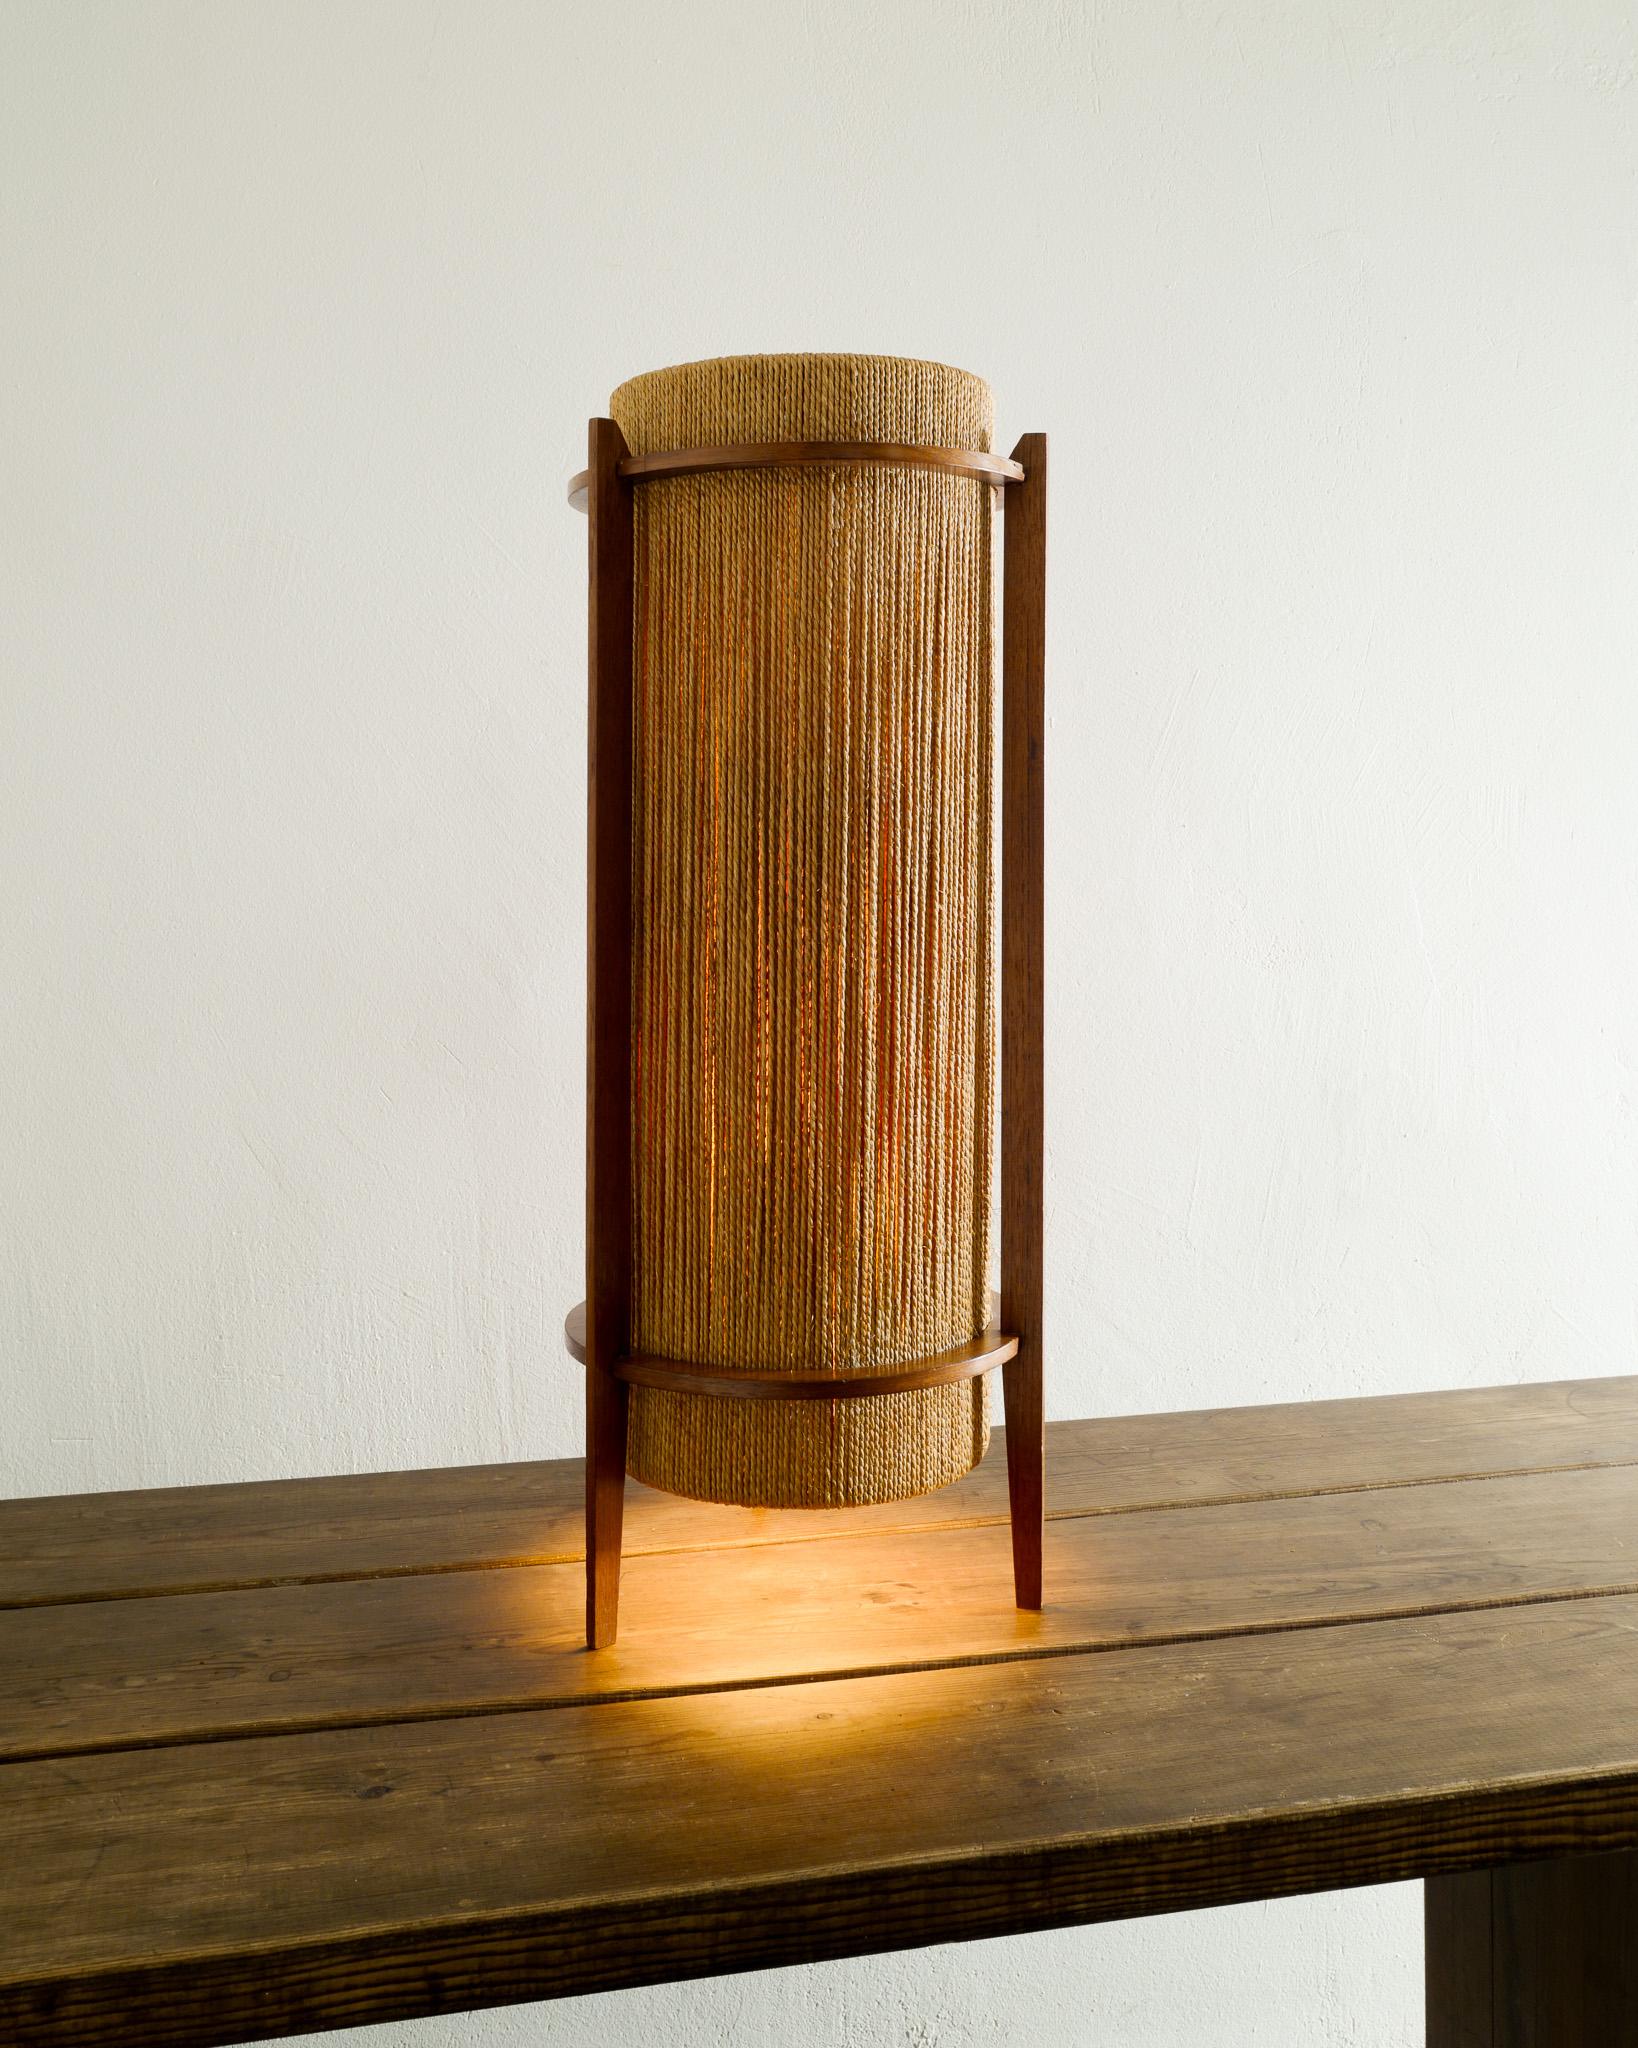 Rare Danish mid century cylinder floor / table lamp in teak wood and hemp strings by Ib Fabiansen produced by Fog & Mørop Denmark, 1950s. In good original condition. 

Dimensions: H: 75 cm / 29.5